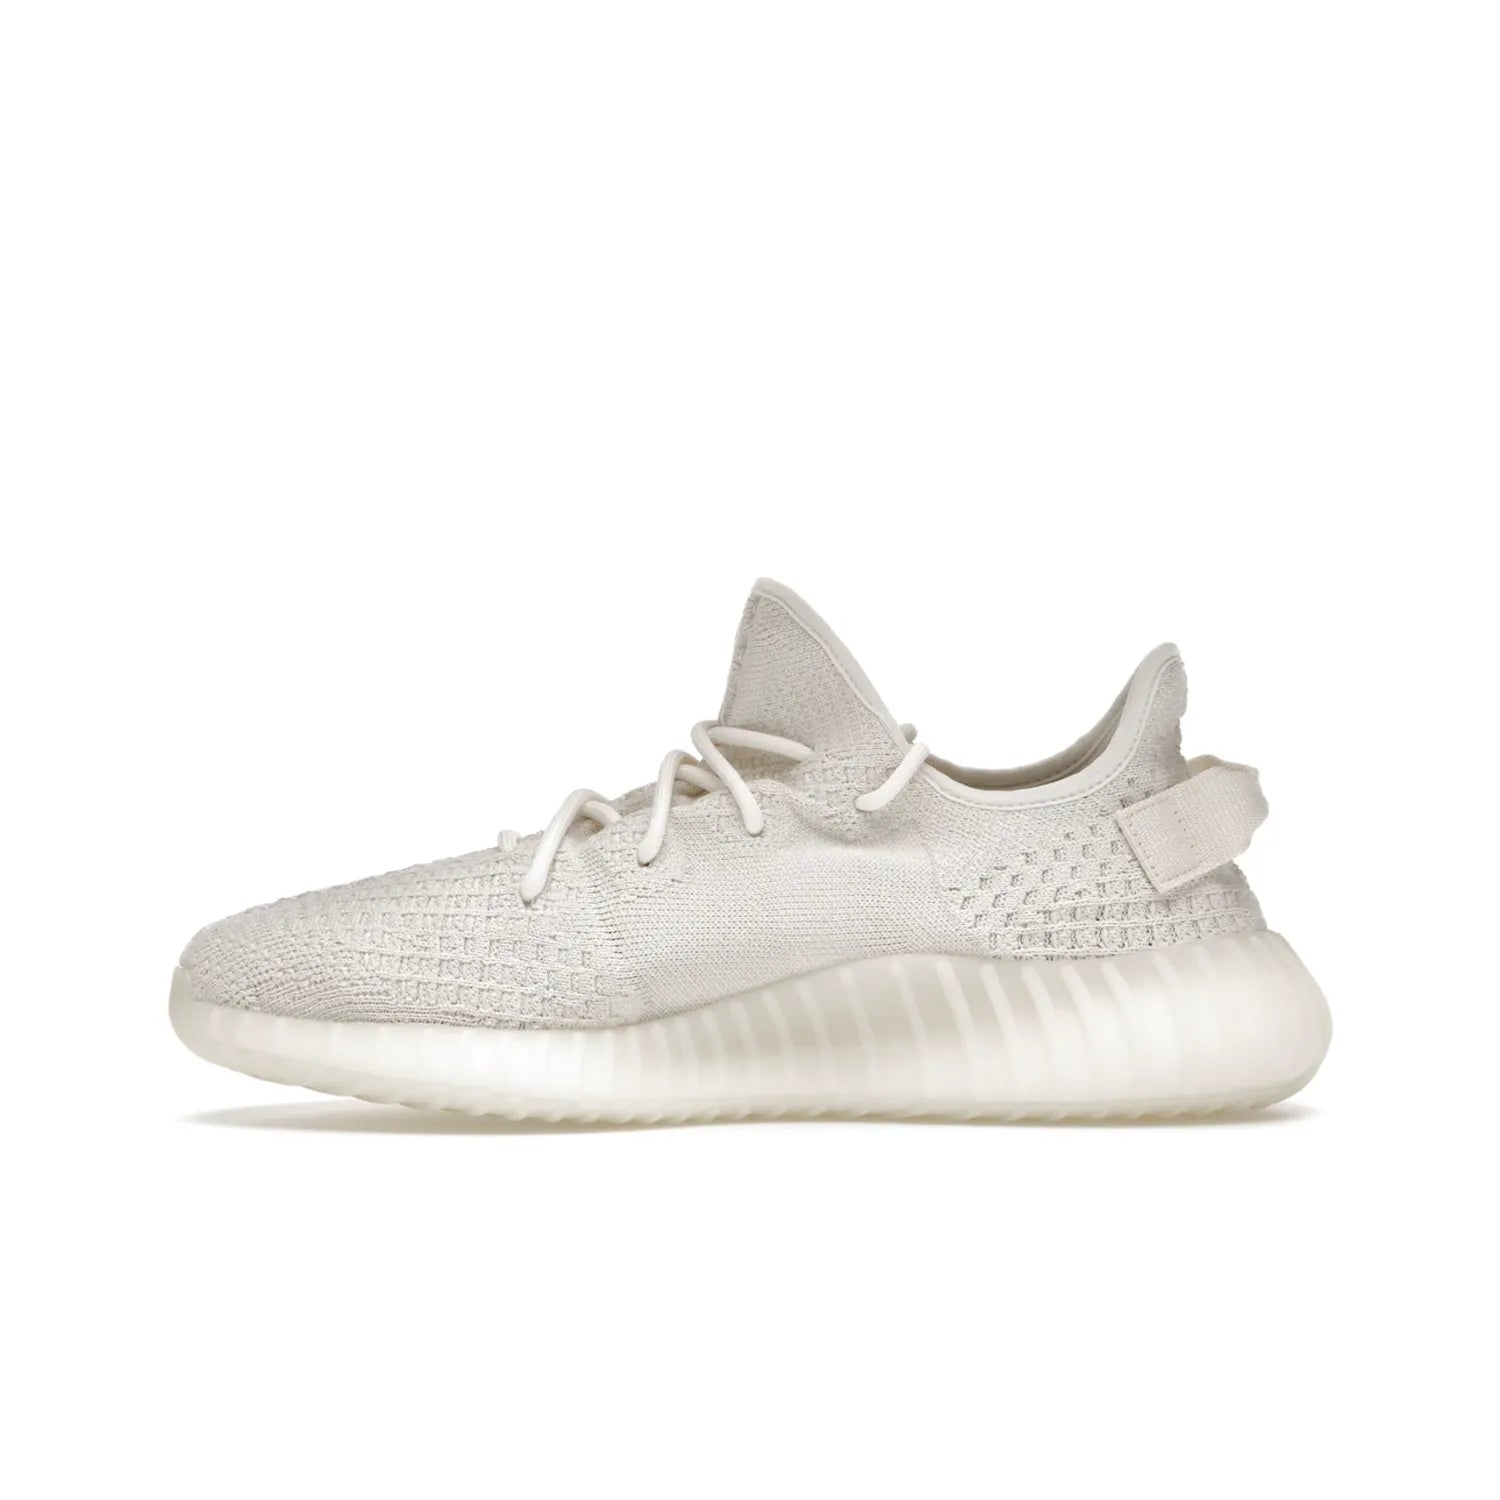 adidas Yeezy Boost 350 V2 Bone - Image 19 - Only at www.BallersClubKickz.com - Grab the stylish and comfortable adidas Yeezy Boost 350 V2 Bone in March 2022. This sneaker features a triple white Primeknit upper, mesh side stripes and canvas heel tabs, sitting atop a semi-translucent sole with Boost technology. Sure to keep your feet comfortable and stylish!